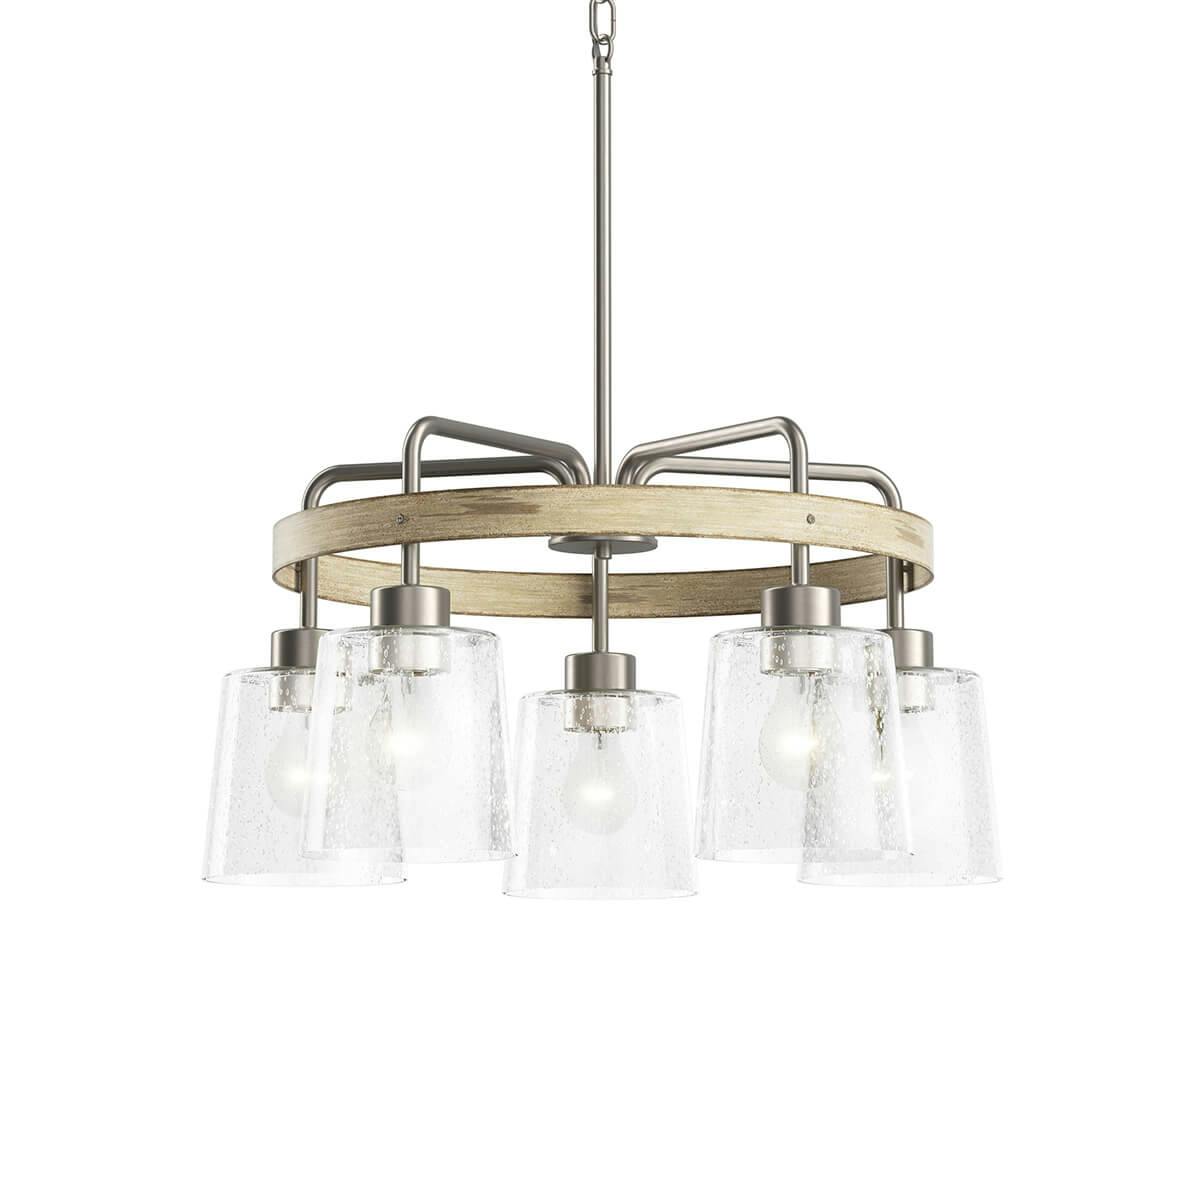 Bolson 24" 5 Light Chandelier Brushed Nickel on a white background